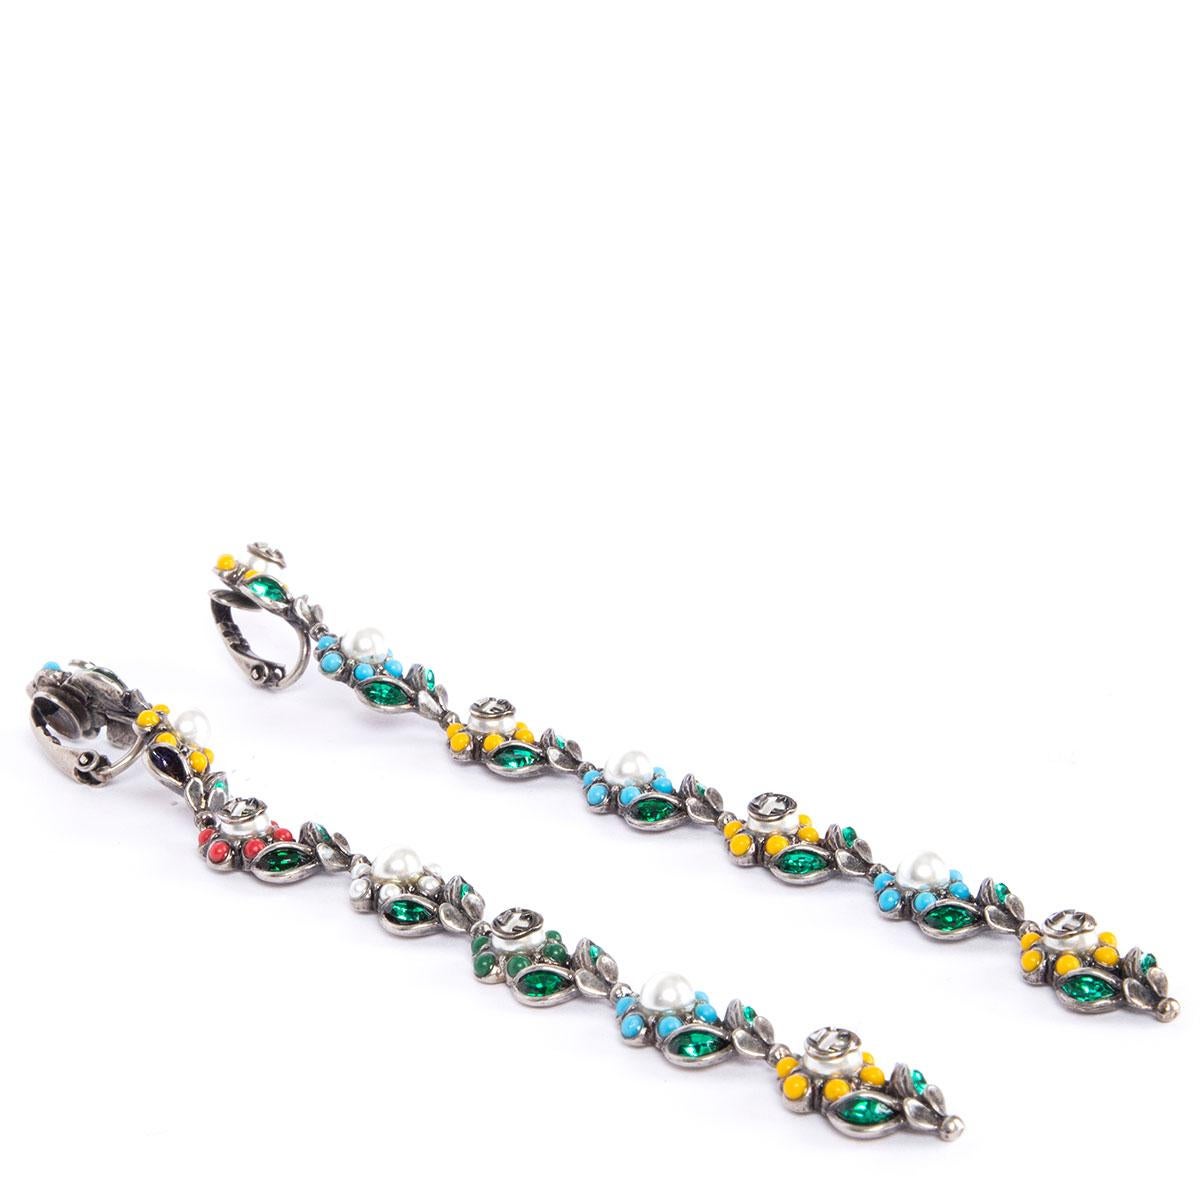 100% authentic Gucci daisy flowers drop ear-clips in ruthenium plated brass with multicolored beads, green Swarovski crystals and faux pearls. Have been worn and are in excellent condition.

Width 1cm (0.4in)
Length 13cm (5.1in)
Hardware Ruthenium